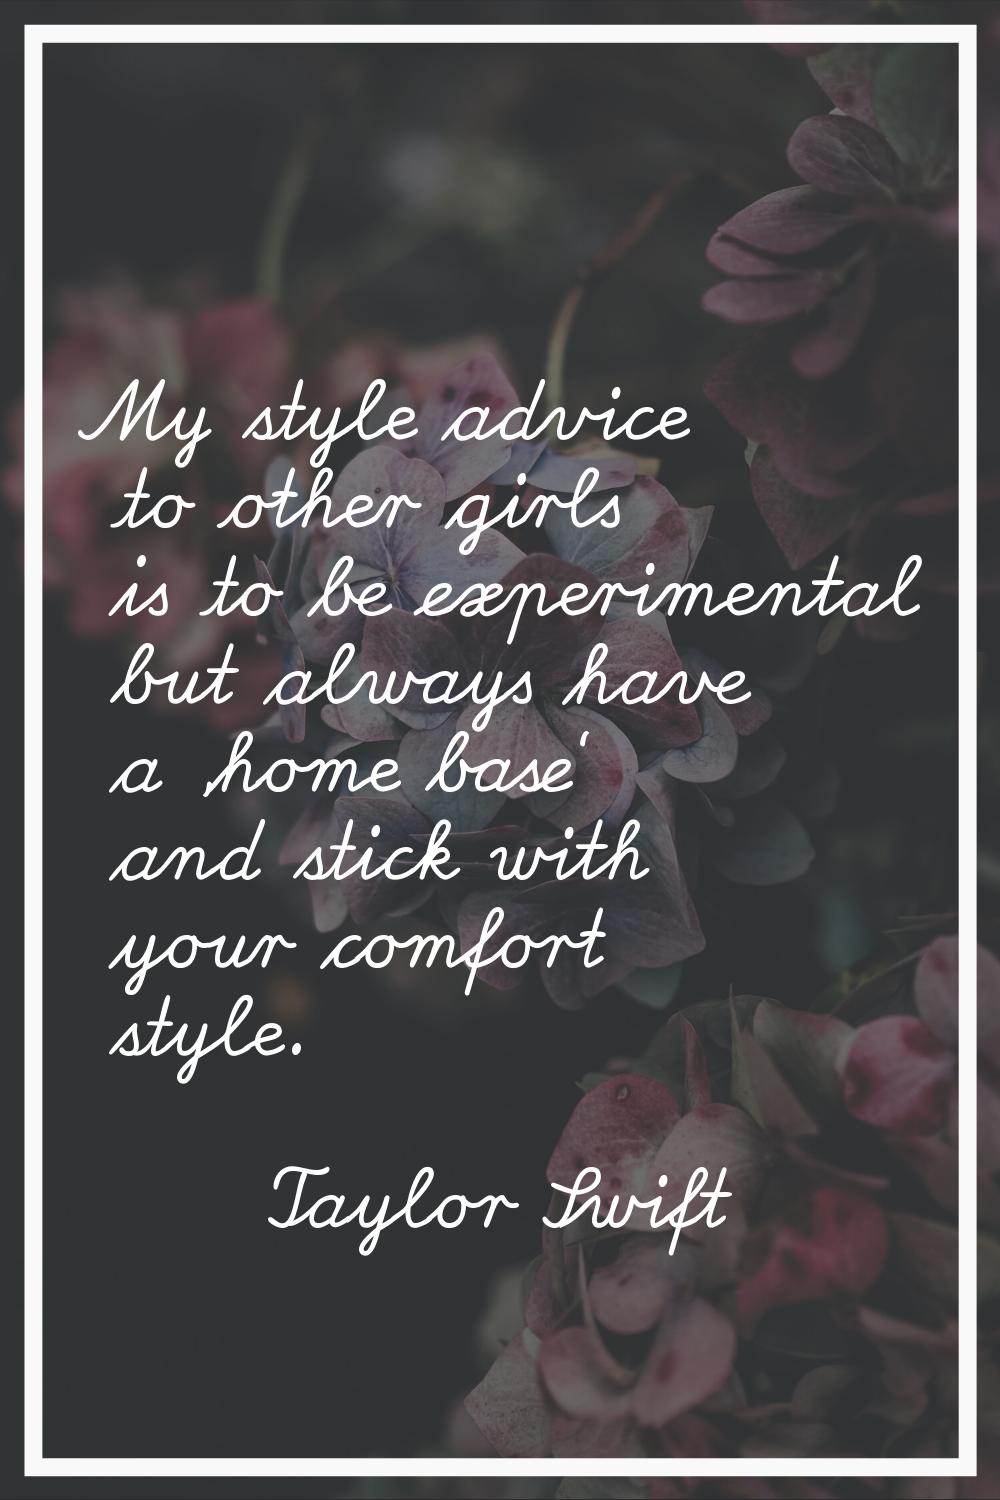 My style advice to other girls is to be experimental but always have a 'home base' and stick with y